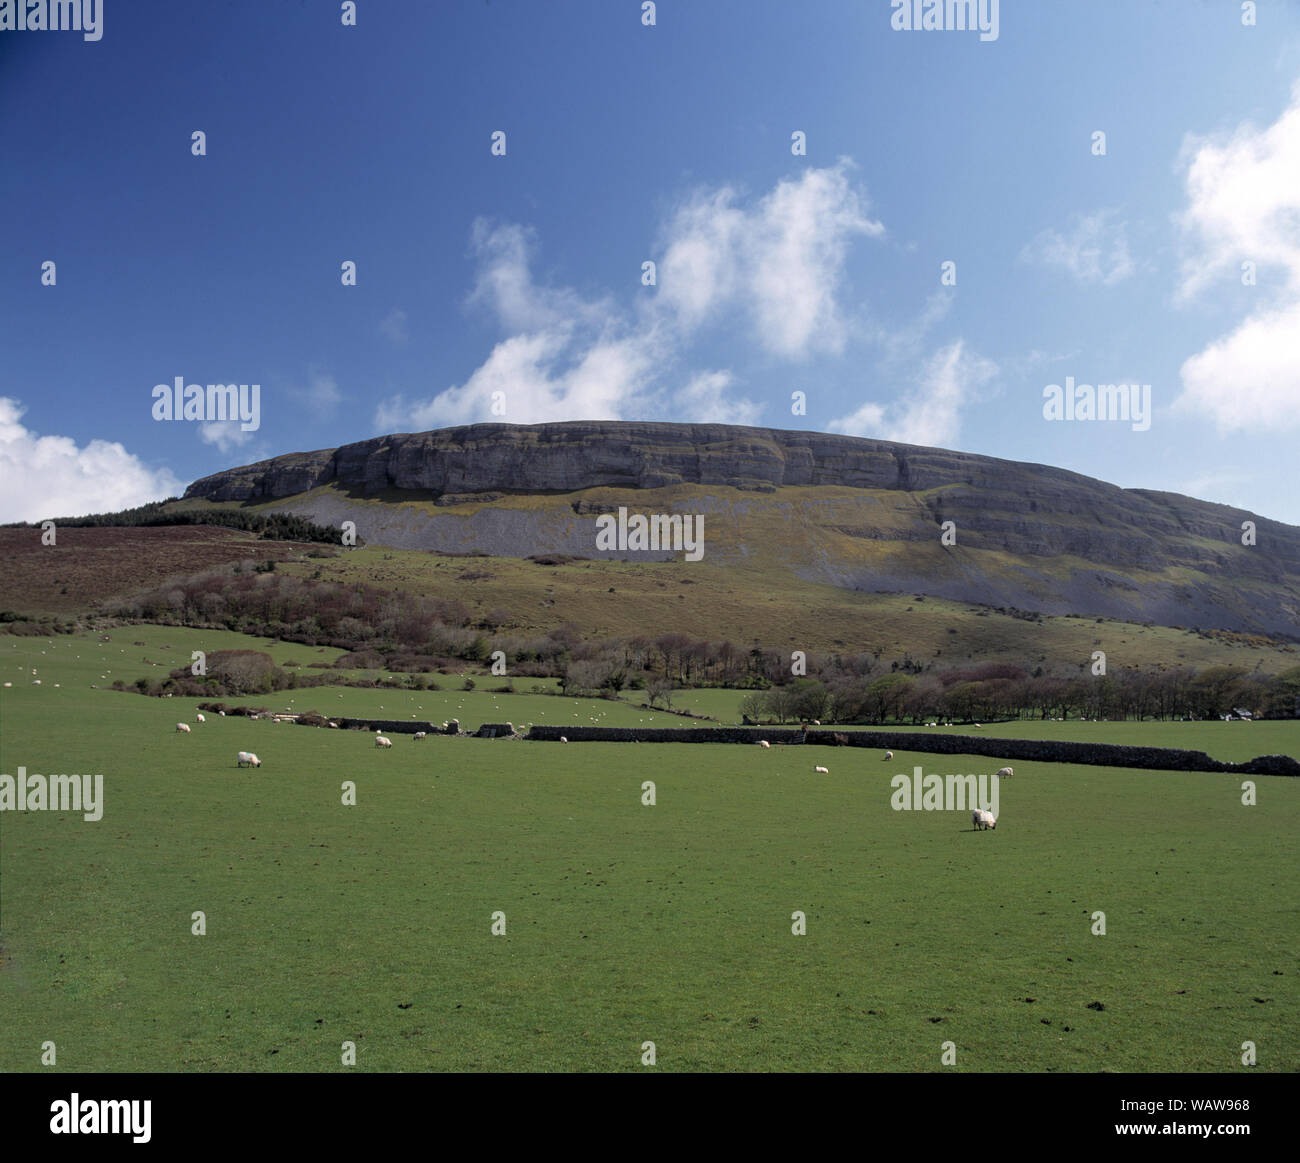 ireland, county kerry, dingle peninsula, green agricultural grazing fields Stock Photo